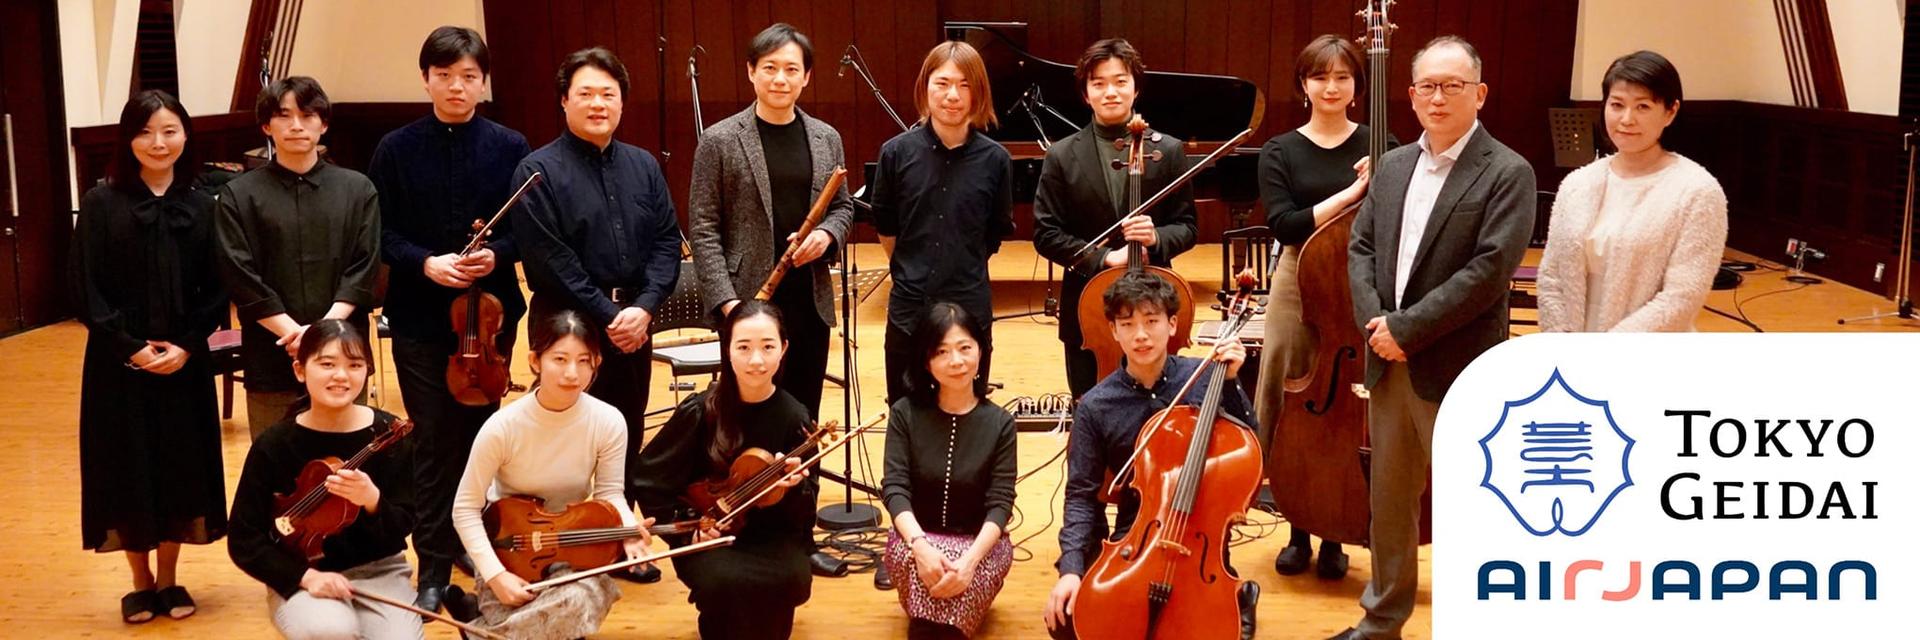 Photograph of Noel Hiyamizu (composer), musicians, and AirJapan employees at recording of boarding music